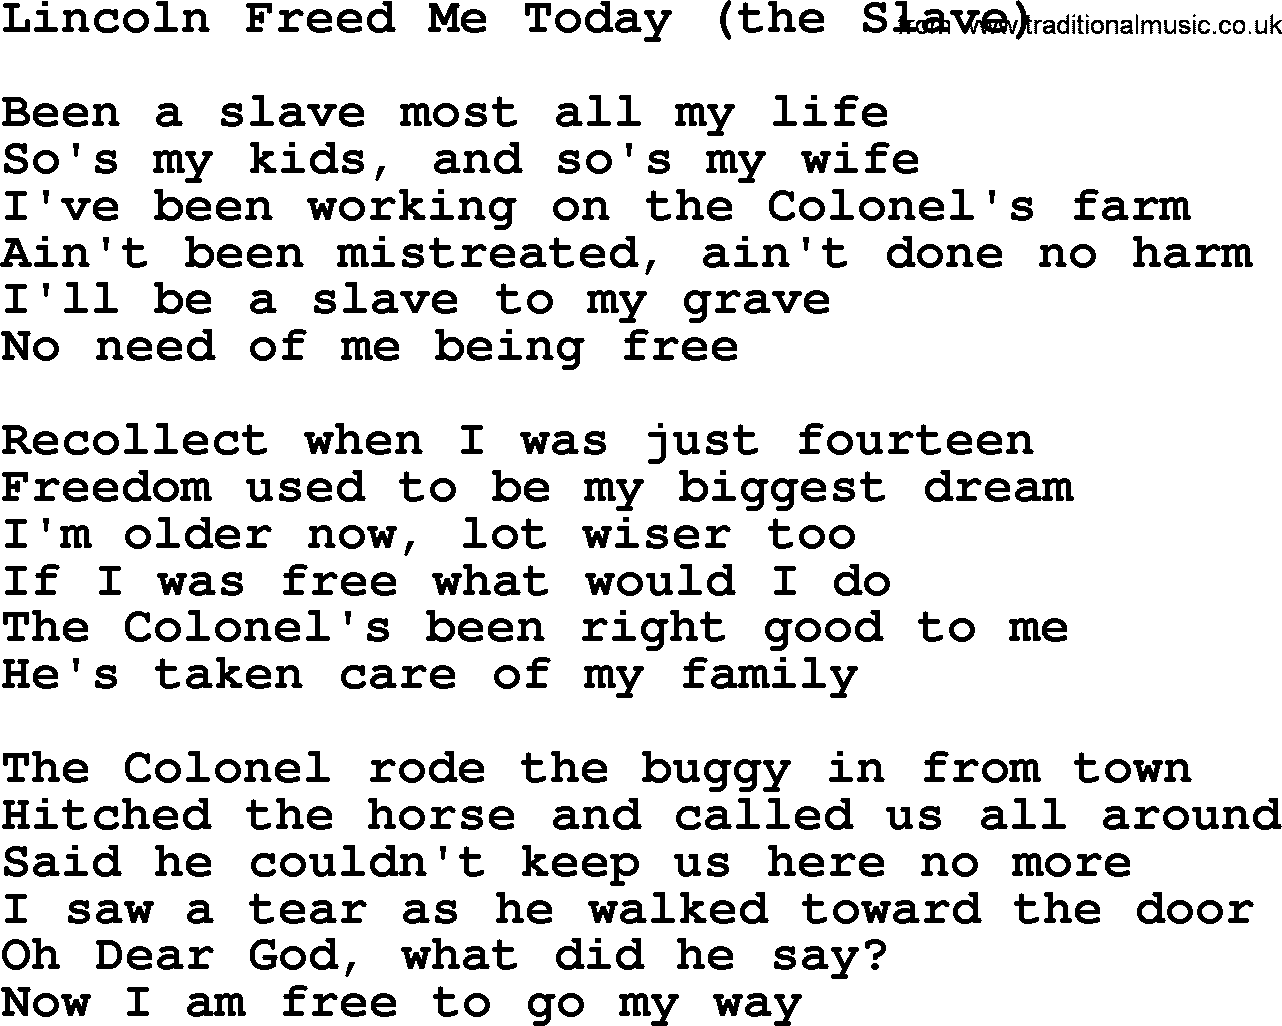 Joan Baez song Lincoln Freed Me Today(The Slave), lyrics